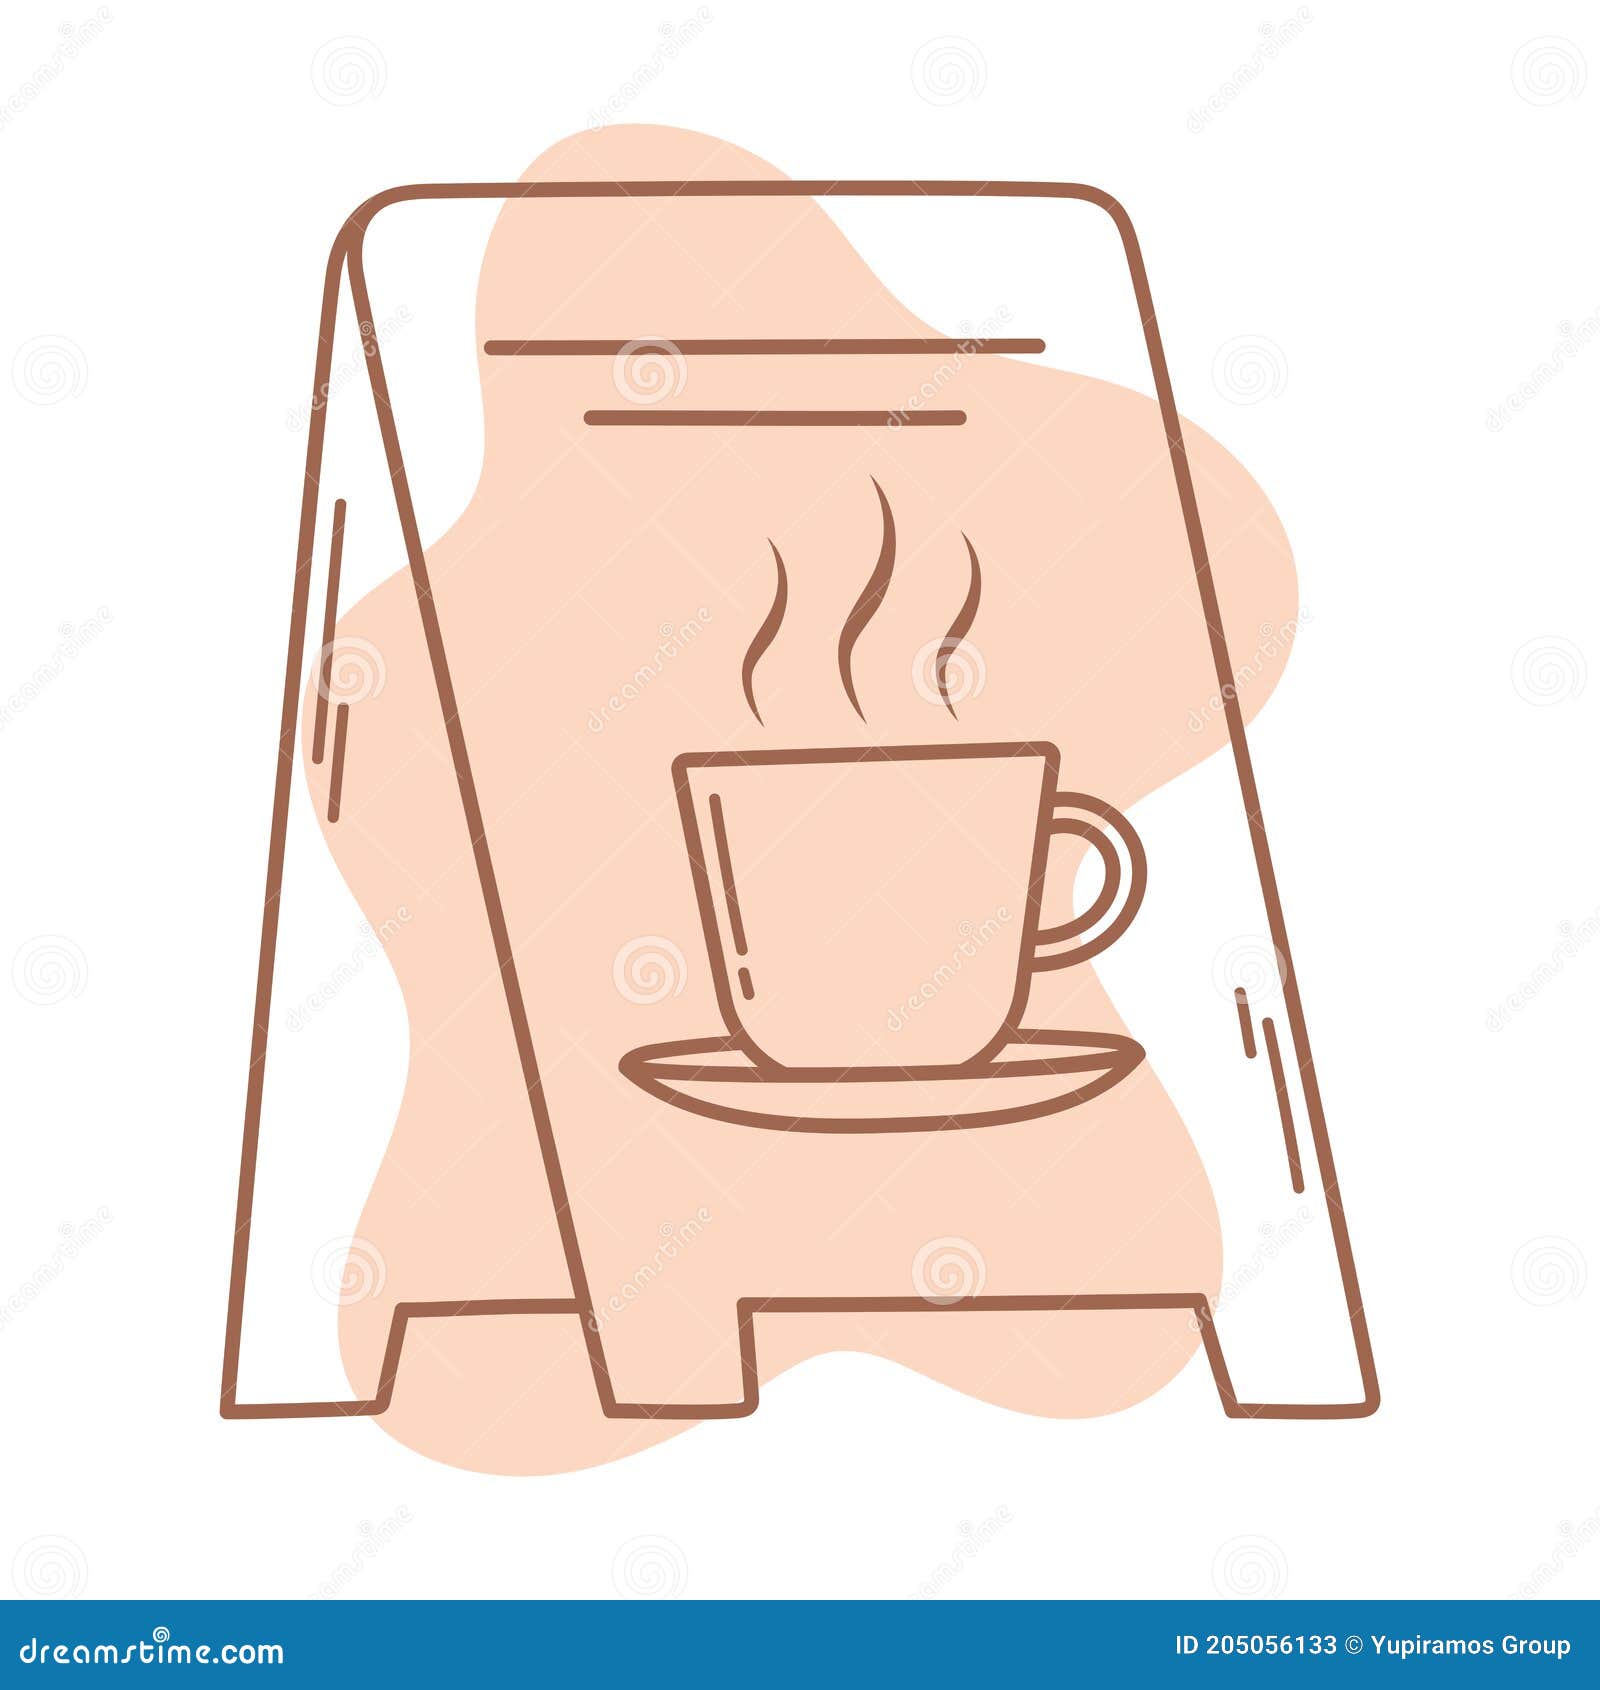 https://thumbs.dreamstime.com/z/coffee-stand-board-cup-icon-line-fill-vector-illustration-205056133.jpg